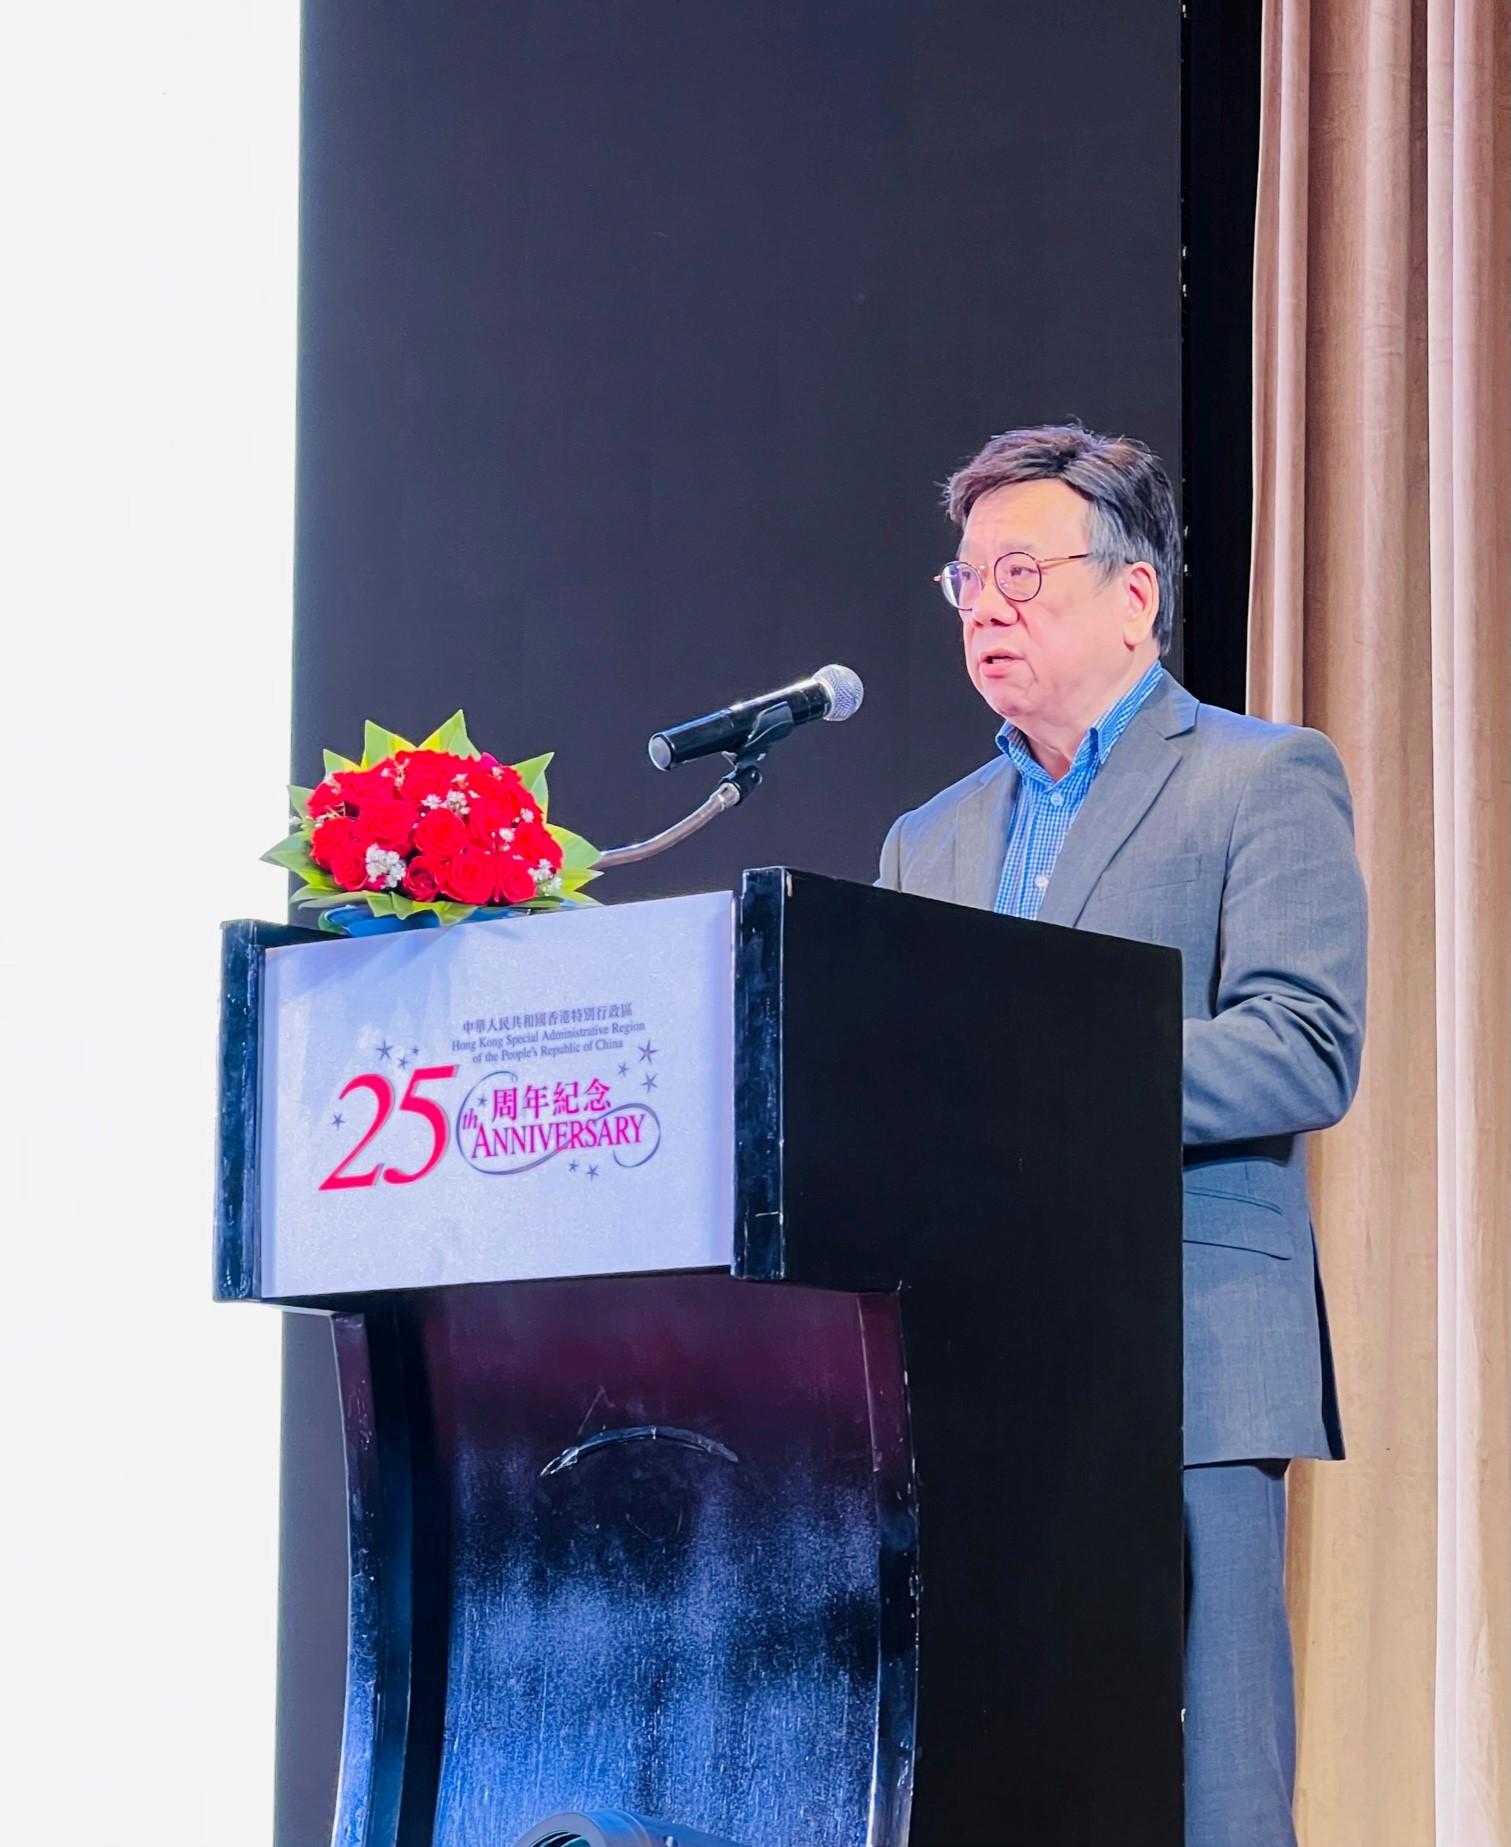 The Secretary for Commerce and Economic Development, Mr Algernon Yau, attended a luncheon to celebrate the 25th anniversary of the establishment of the Hong Kong Special Administrative Region in Phnom Penh, Cambodia, today (September 18). Photo shows Mr Yau speaking to the local business and political sectors on Hong Kong’s business opportunities at the luncheon.